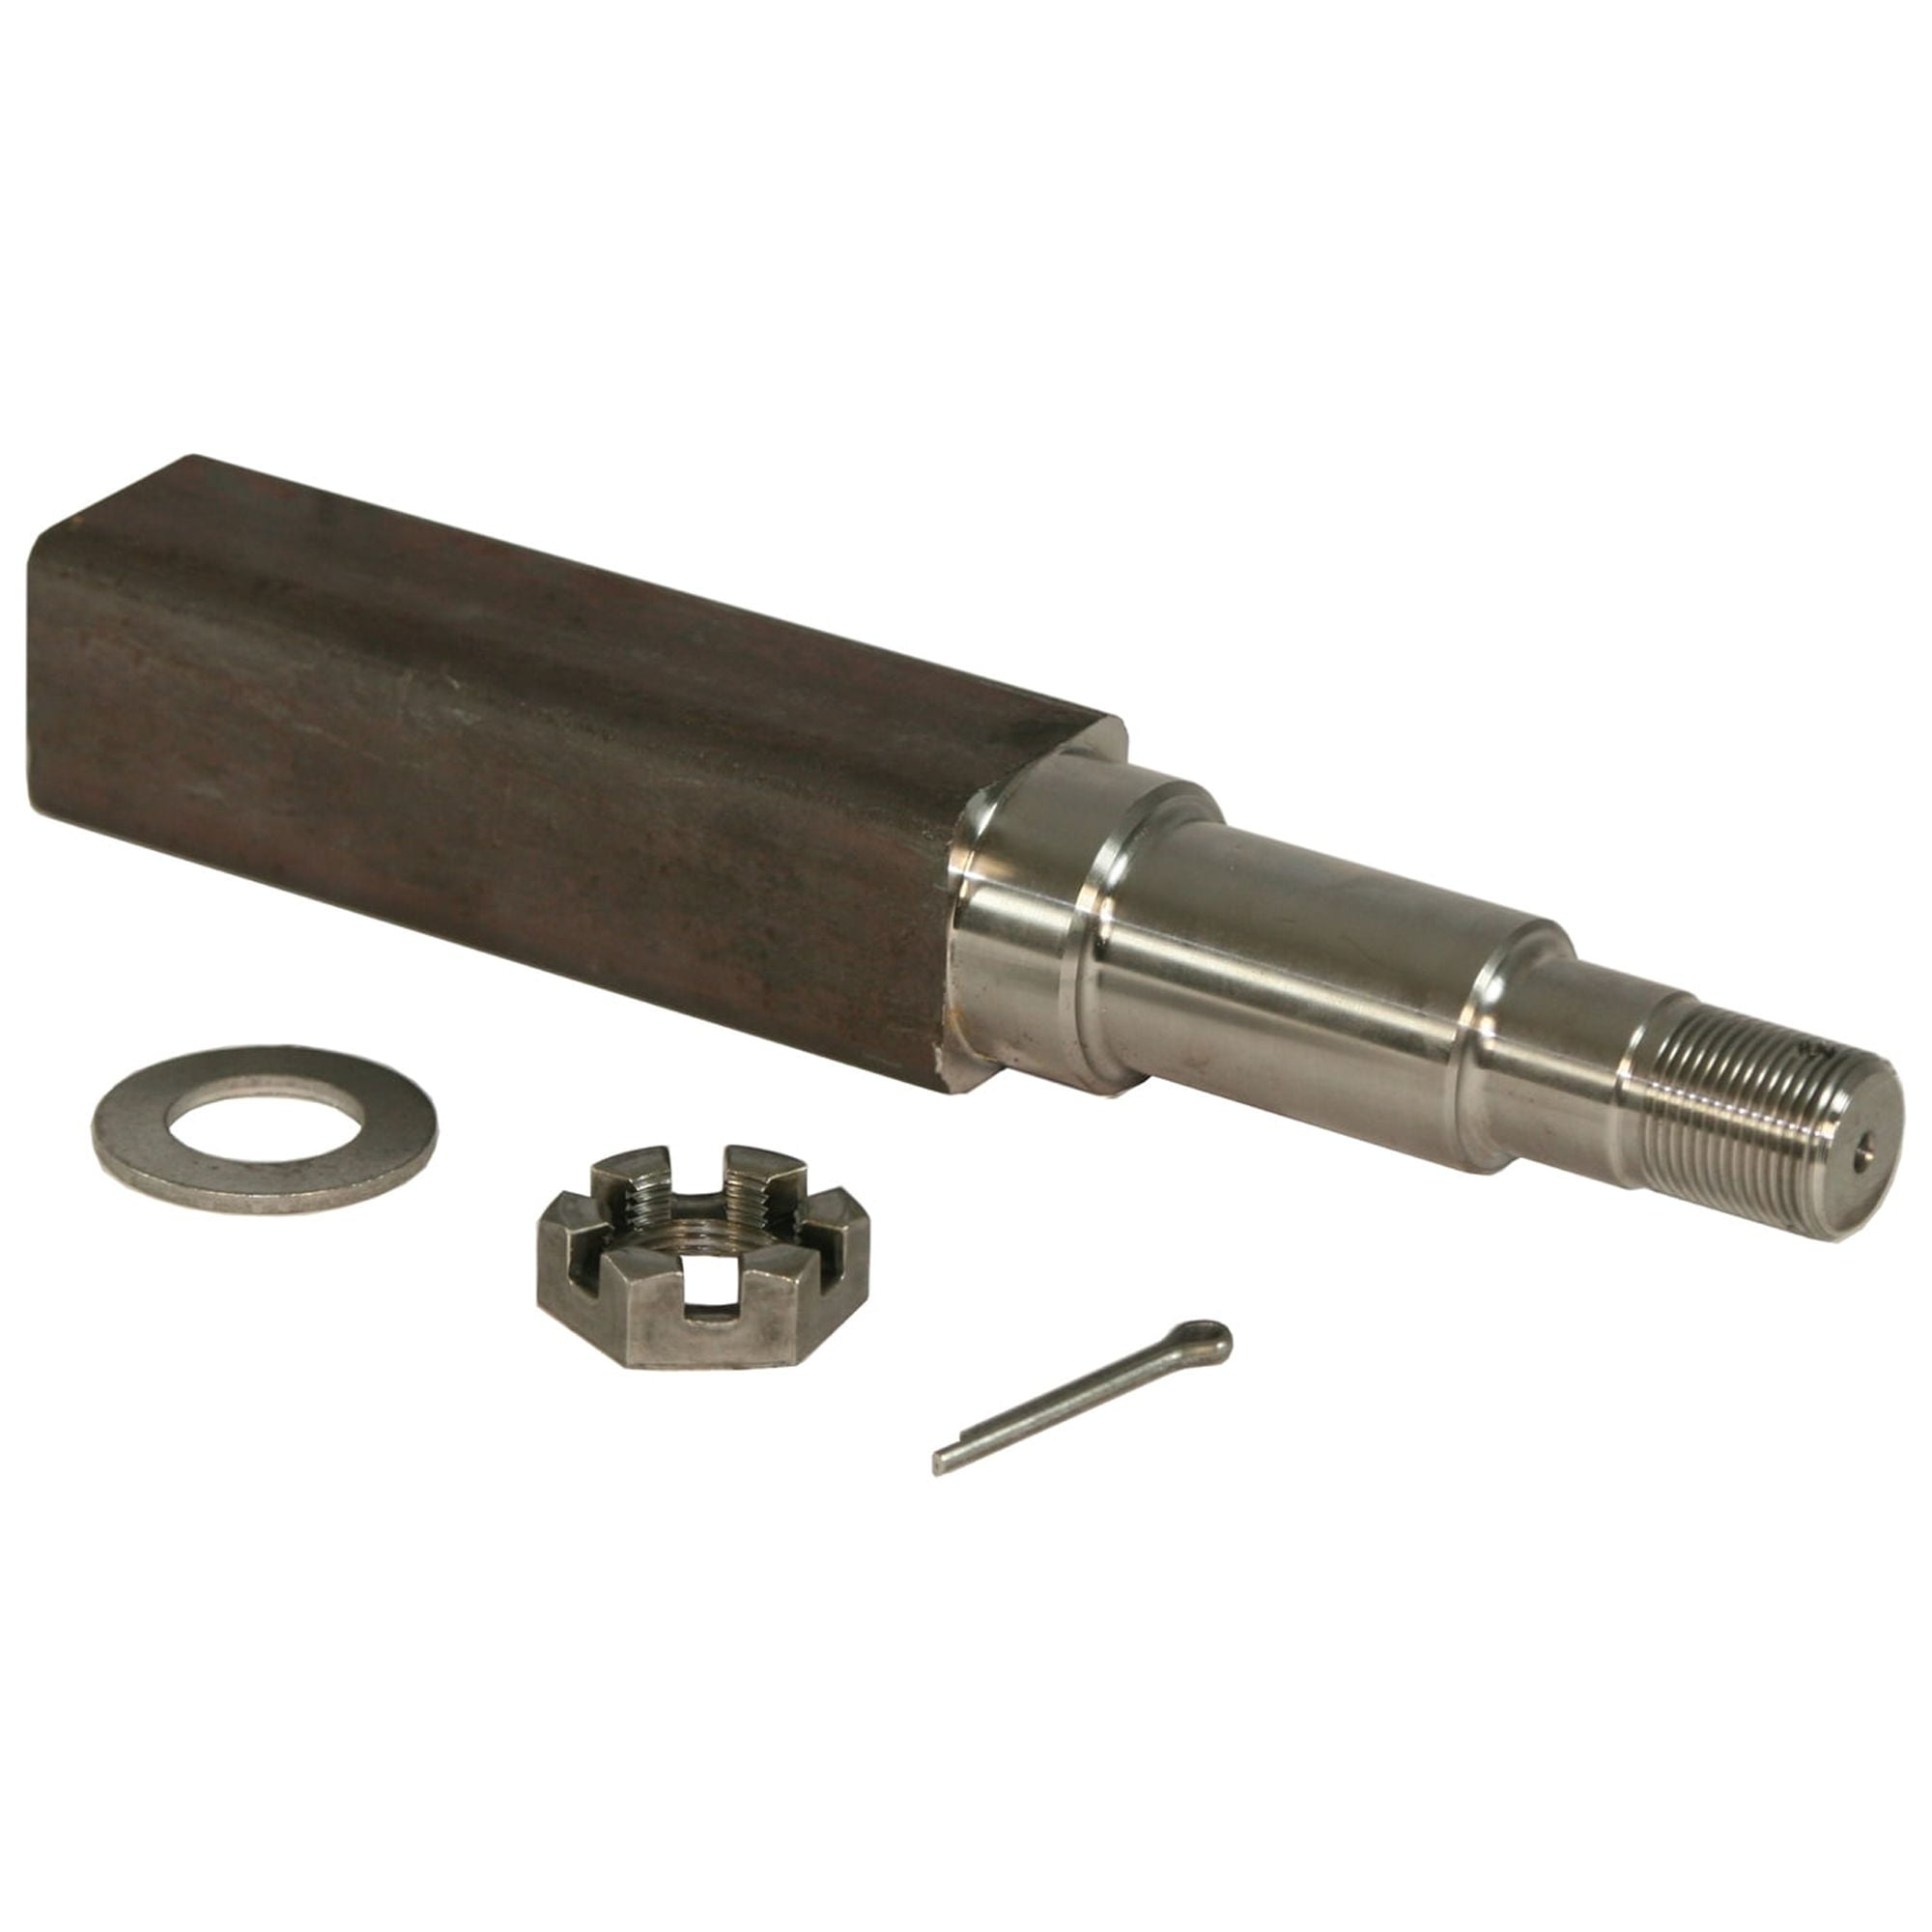 Trailer Axle Spindle For 1-3/8 To 1-1/16 I.D. Bearings